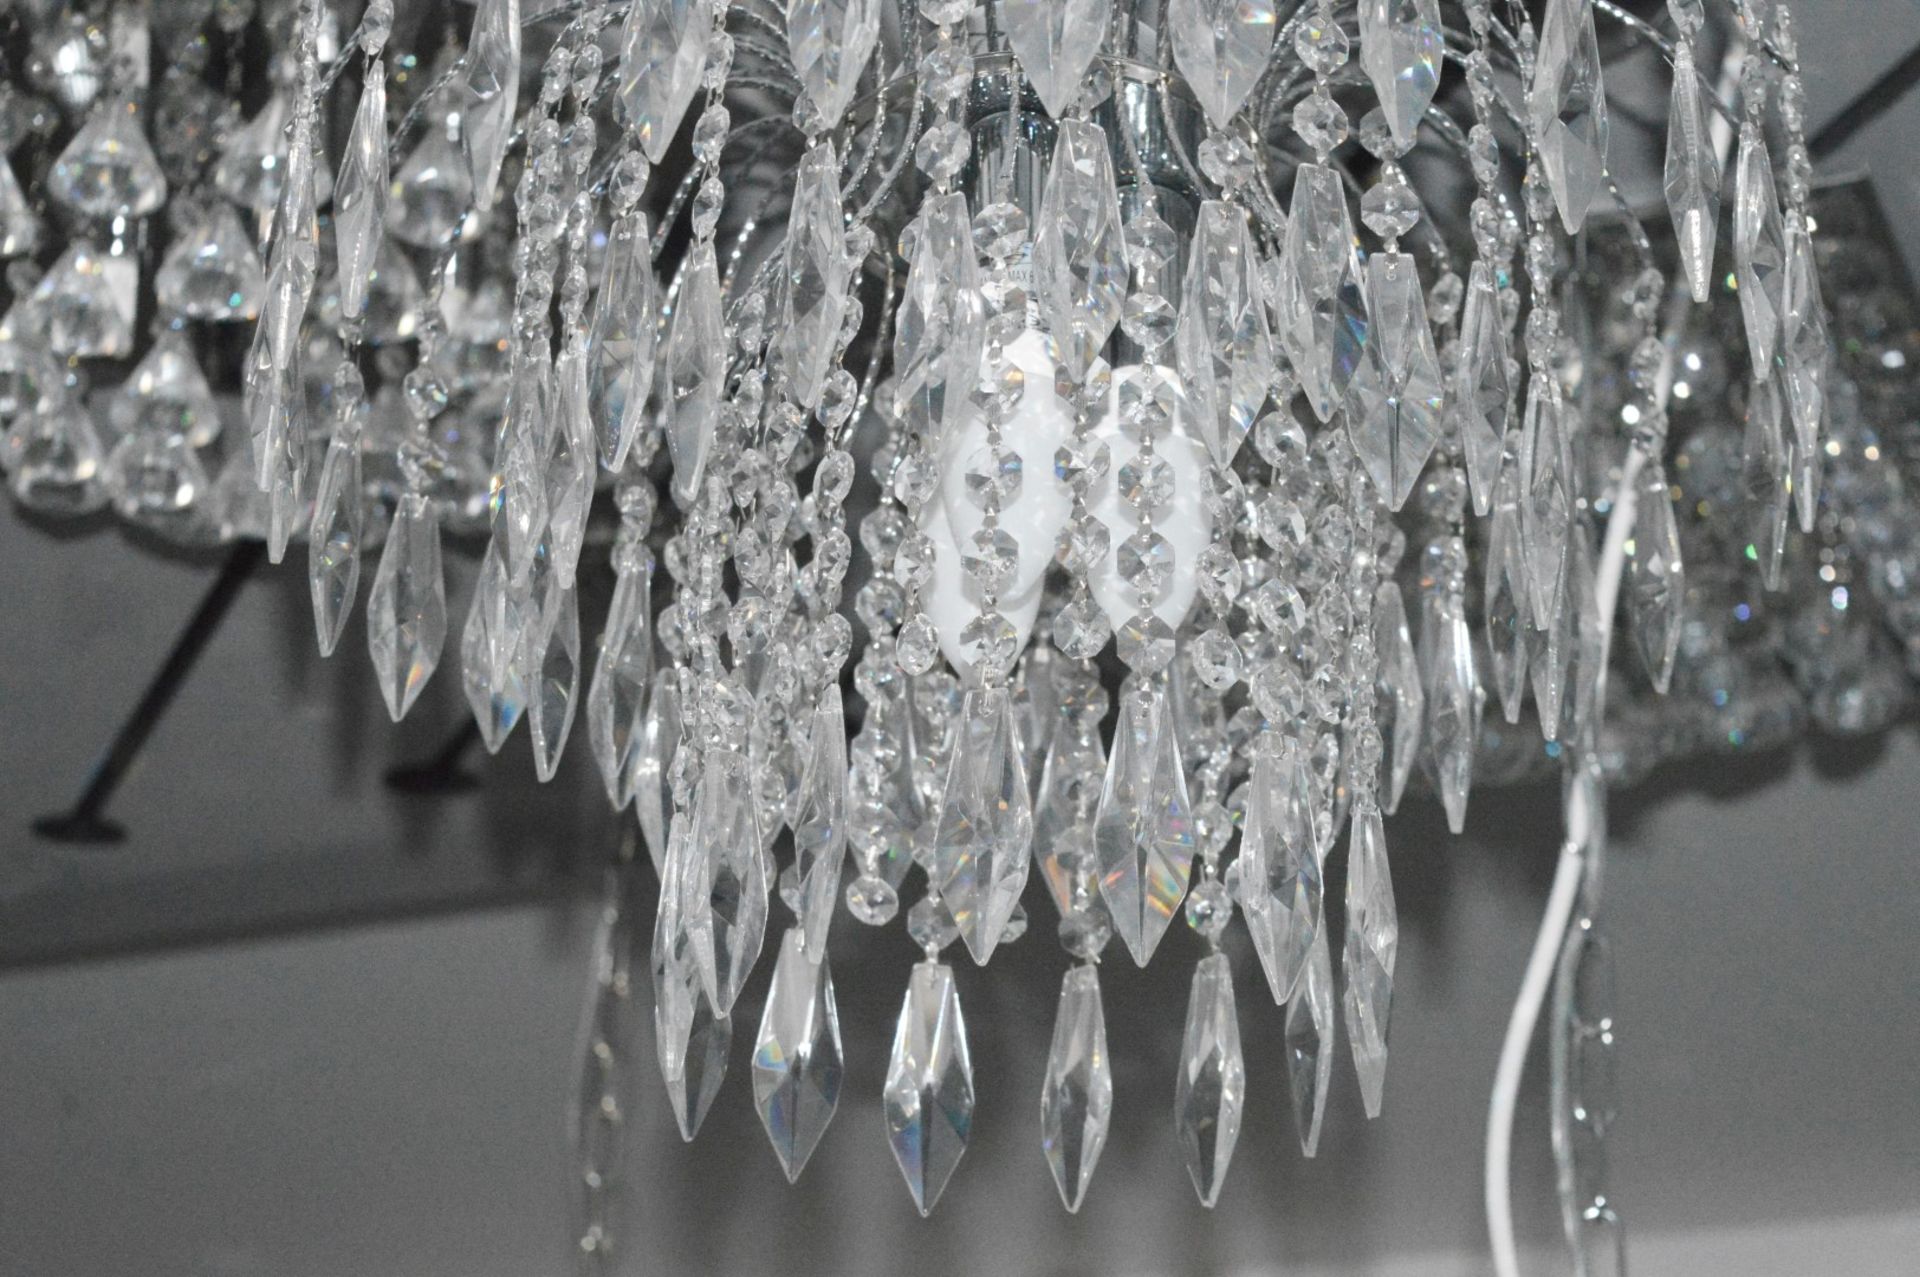 1 x WATERFALL Chrome 3-Light Ceiling Fitting With Crystal Button & Drops Decoration - RRP £256.80 - Image 3 of 4